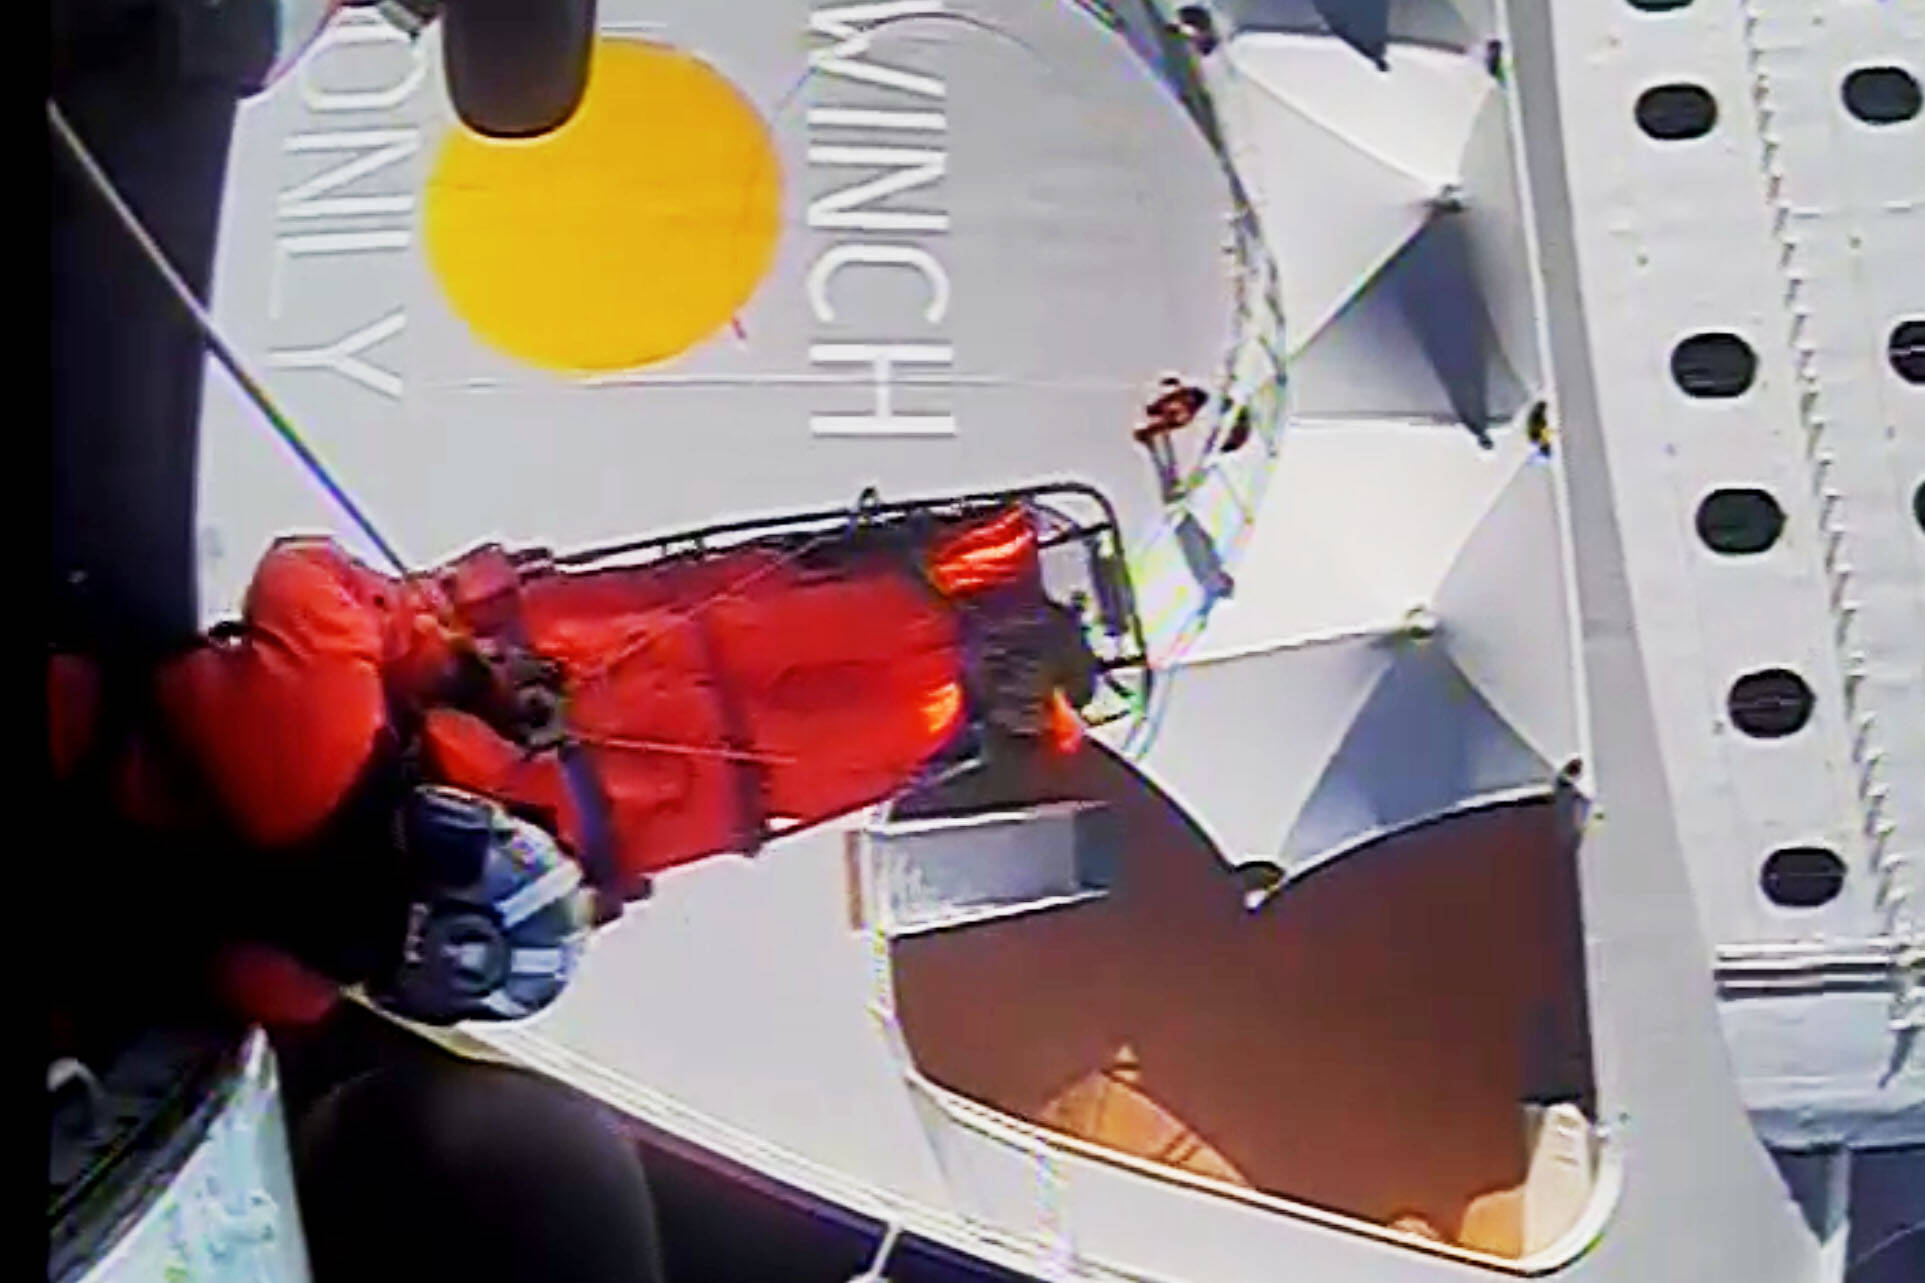 An MH-60 Jayhawk crew chief from Coast Guard Air Station Sitka hoists a casualty from the Norwegian Princess while underway in the Chatham Strait on July 18, 2020. (Screenshot)